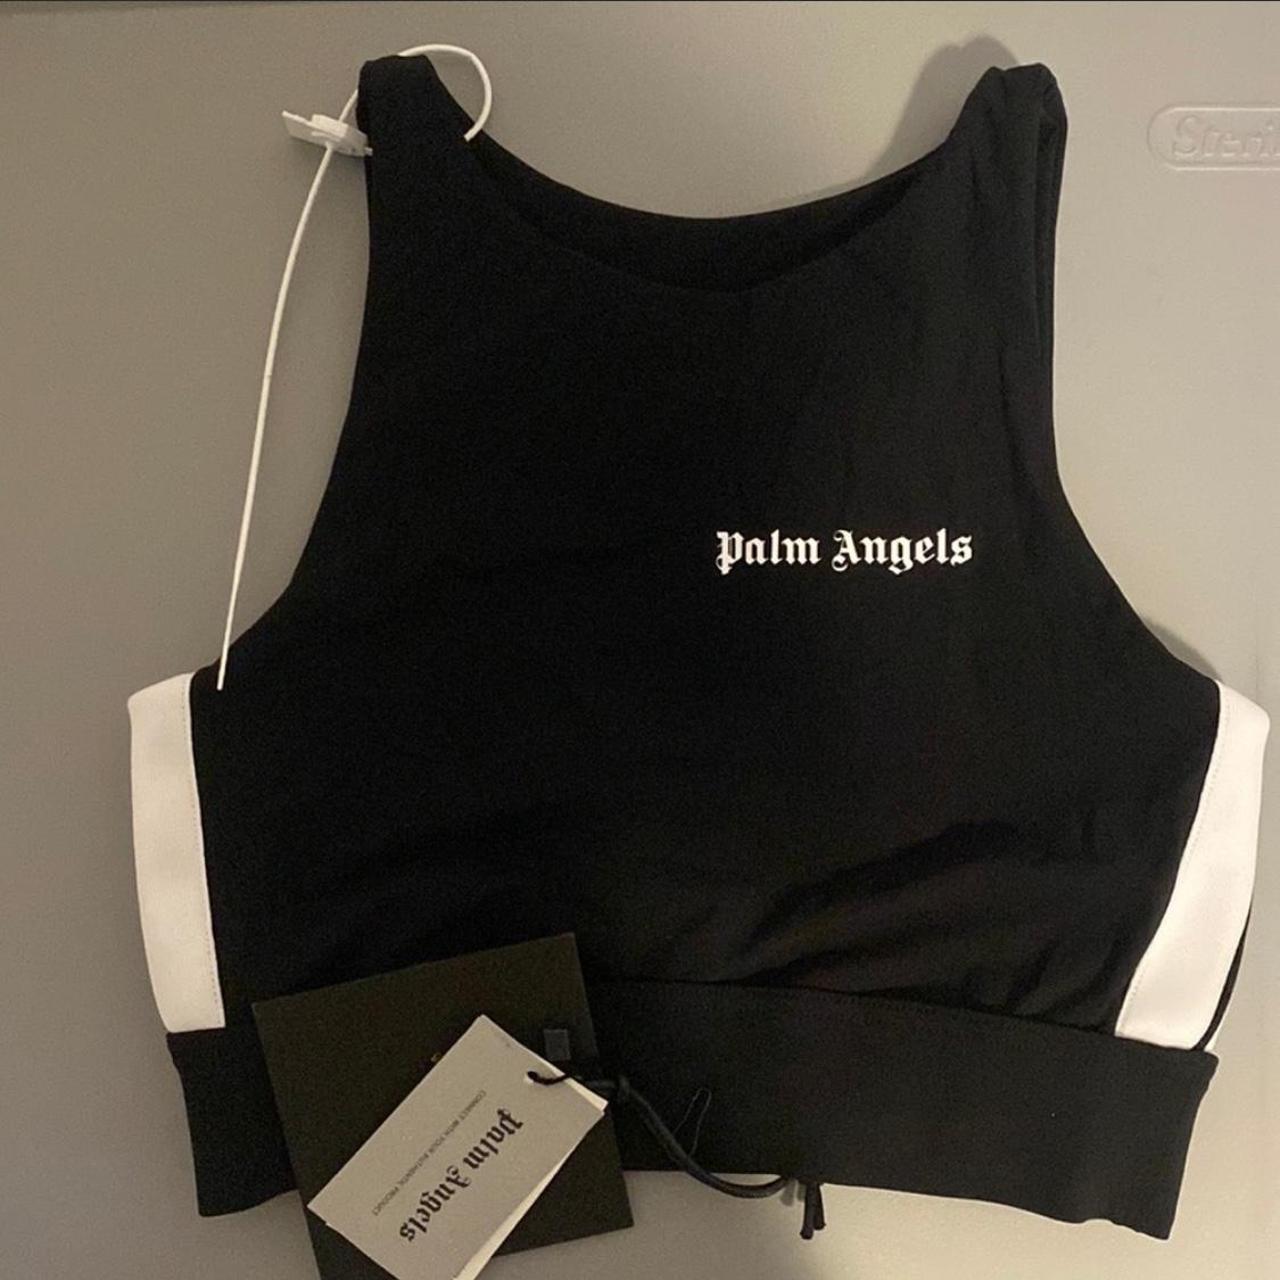 Palm Angels Women's Black and White Crop-top